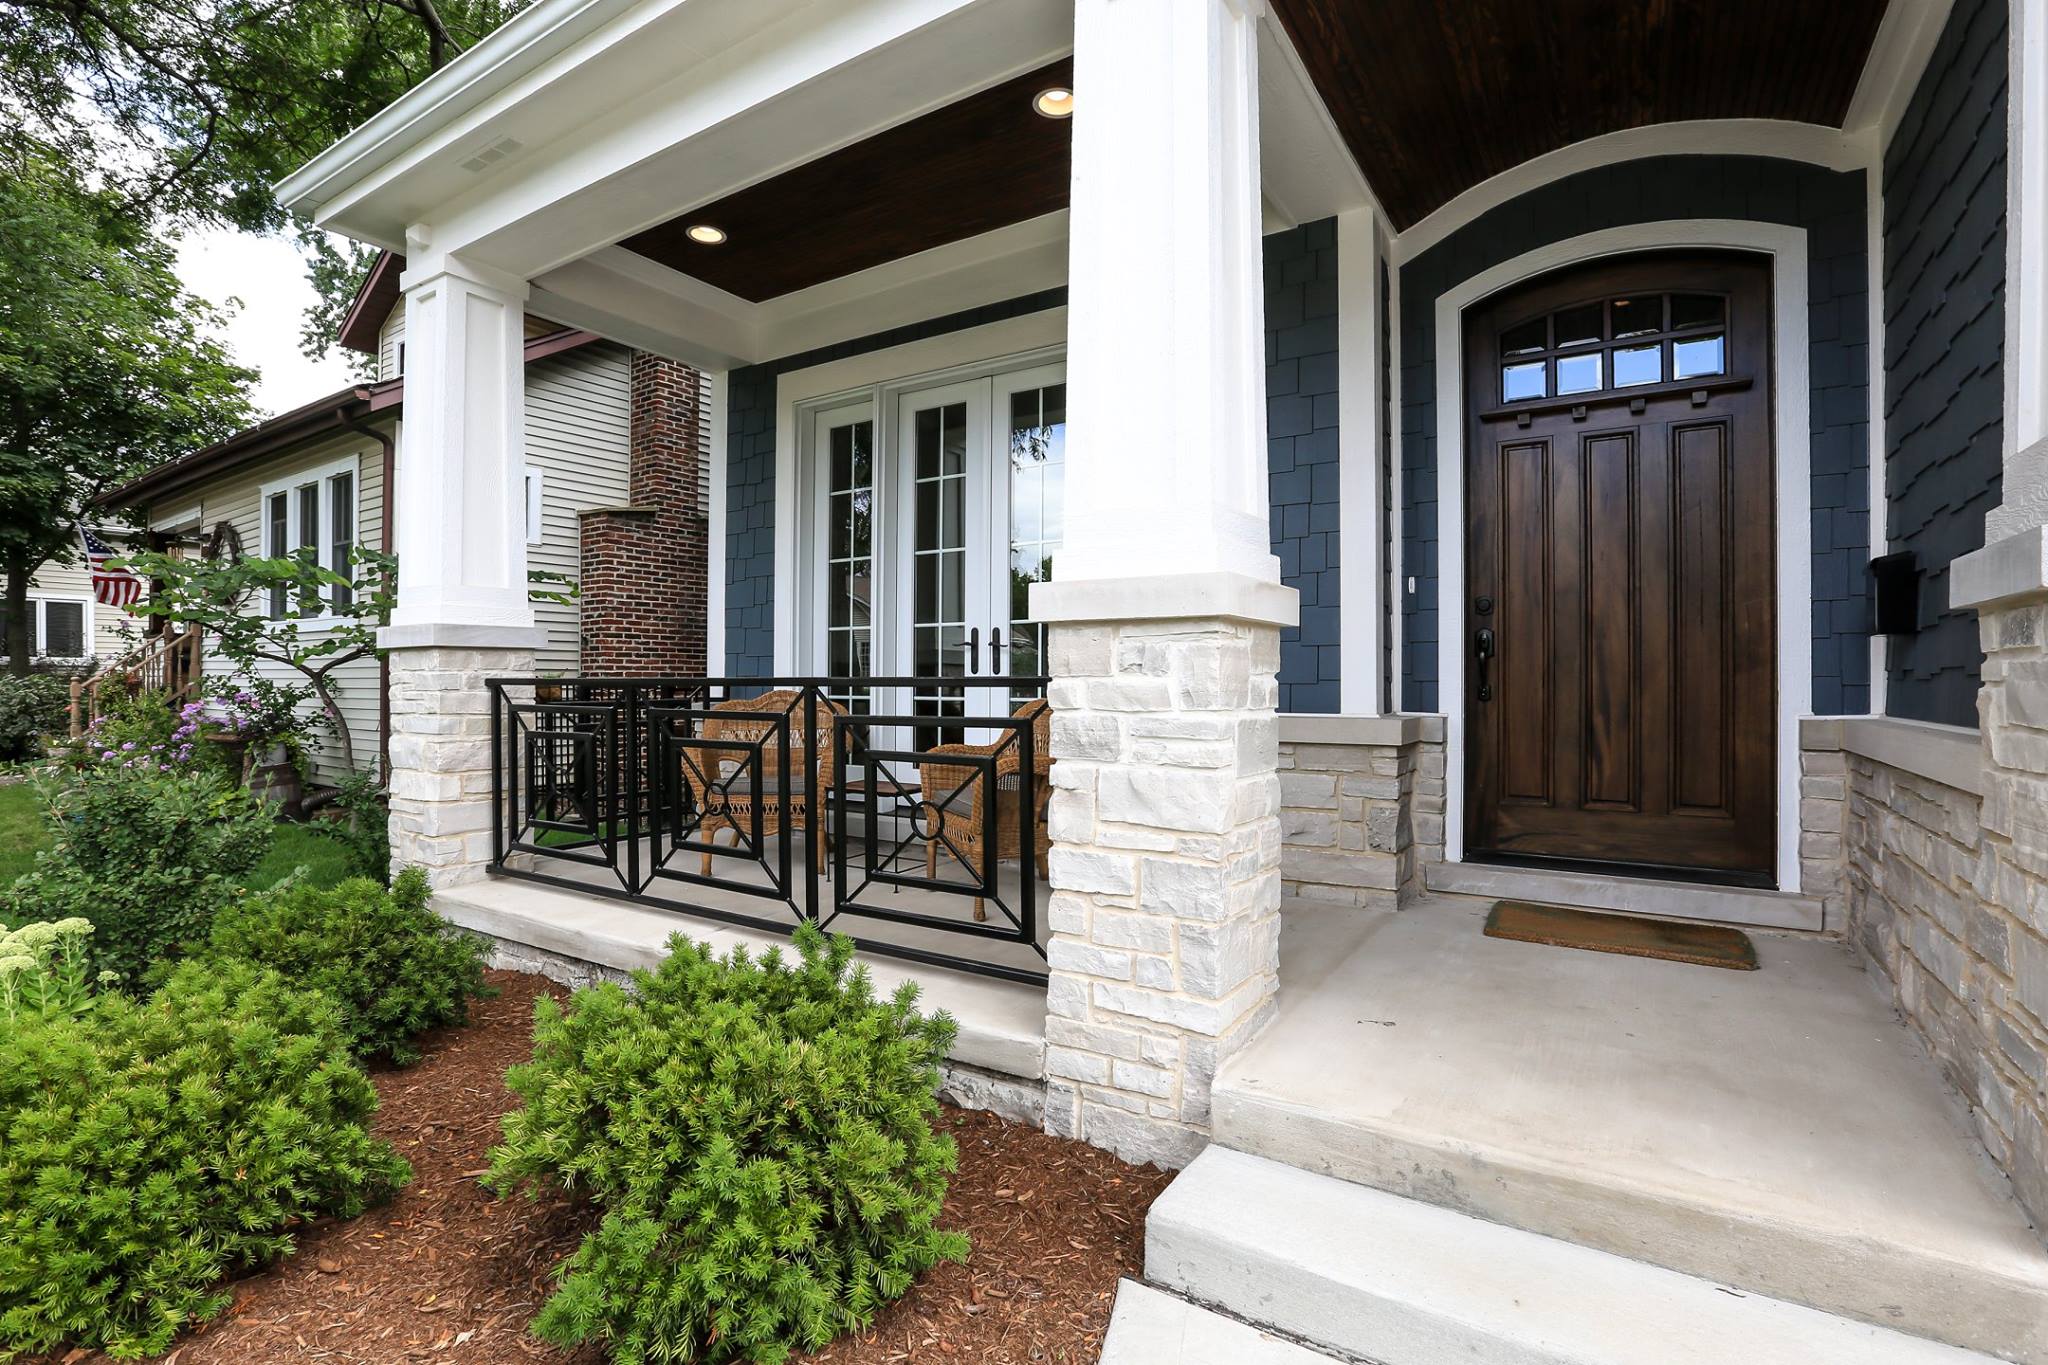 Blue siding color with brown stained front door. Black porch railings with white tapered porch columns. Concrete porch and steps. Light stone veneer. Dark brown stained wood porch soffit with recessed lighting.